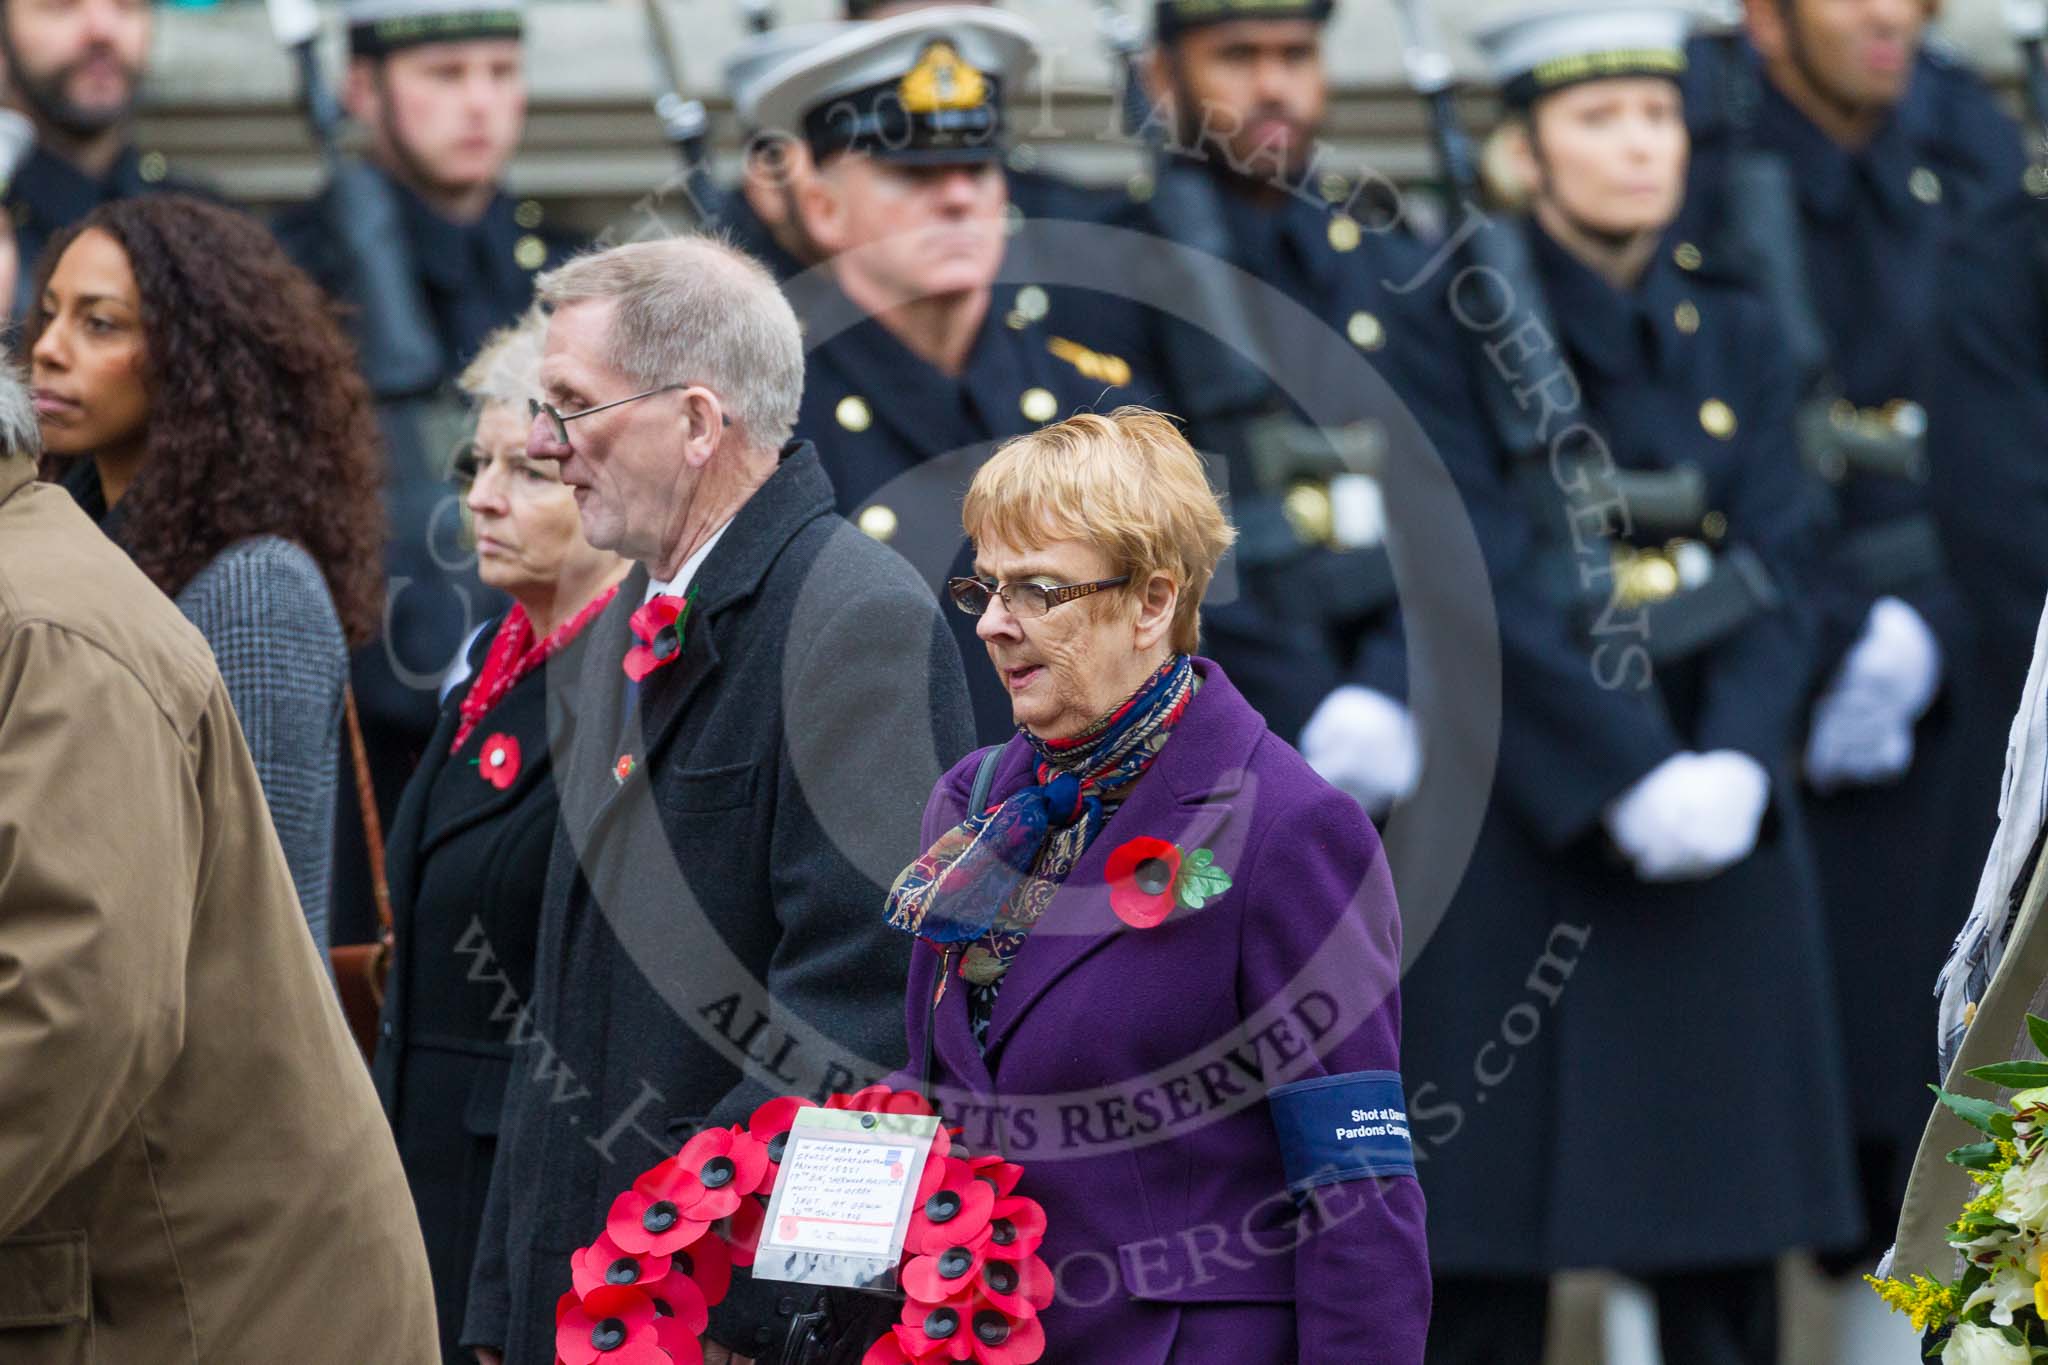 Remembrance Sunday at the Cenotaph 2015: Group M38, Shot at Dawn Pardons Campaign.
Cenotaph, Whitehall, London SW1,
London,
Greater London,
United Kingdom,
on 08 November 2015 at 12:19, image #1657